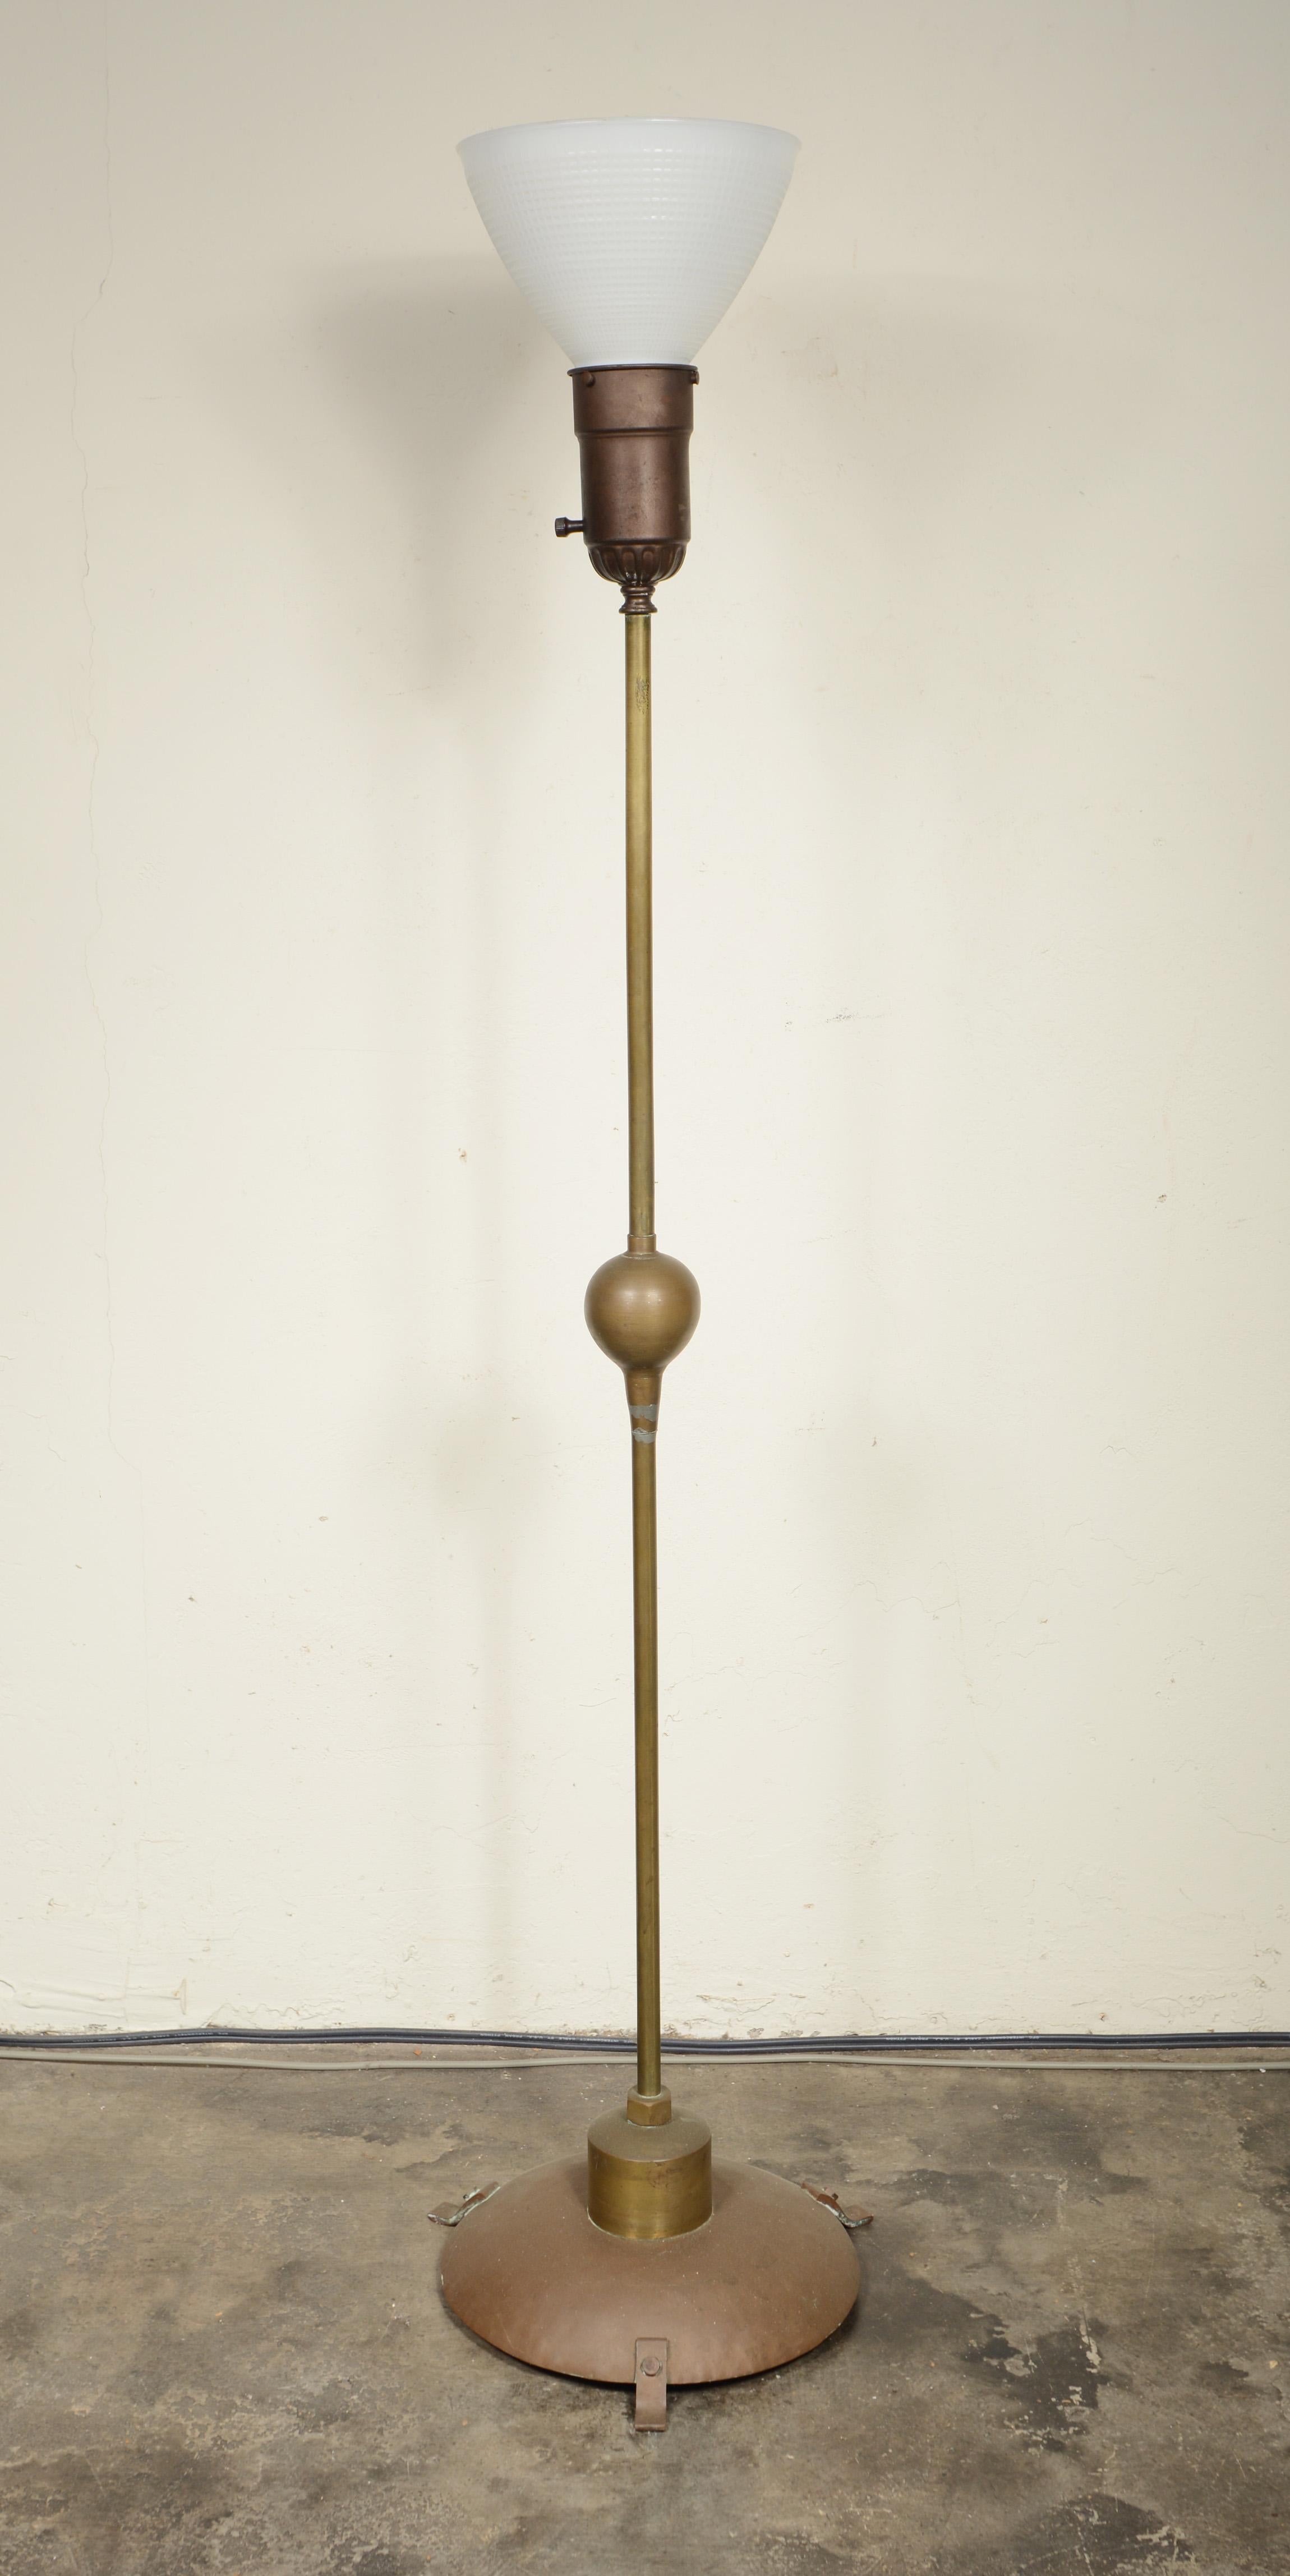 Amateur craftsman made modernist floor lamp. The lamp is a little arts and crafts, art deco and machine age combined. A great imaginative form, the lamp is made of found brass pieces with solder filling some holes and imperfections. The dish base